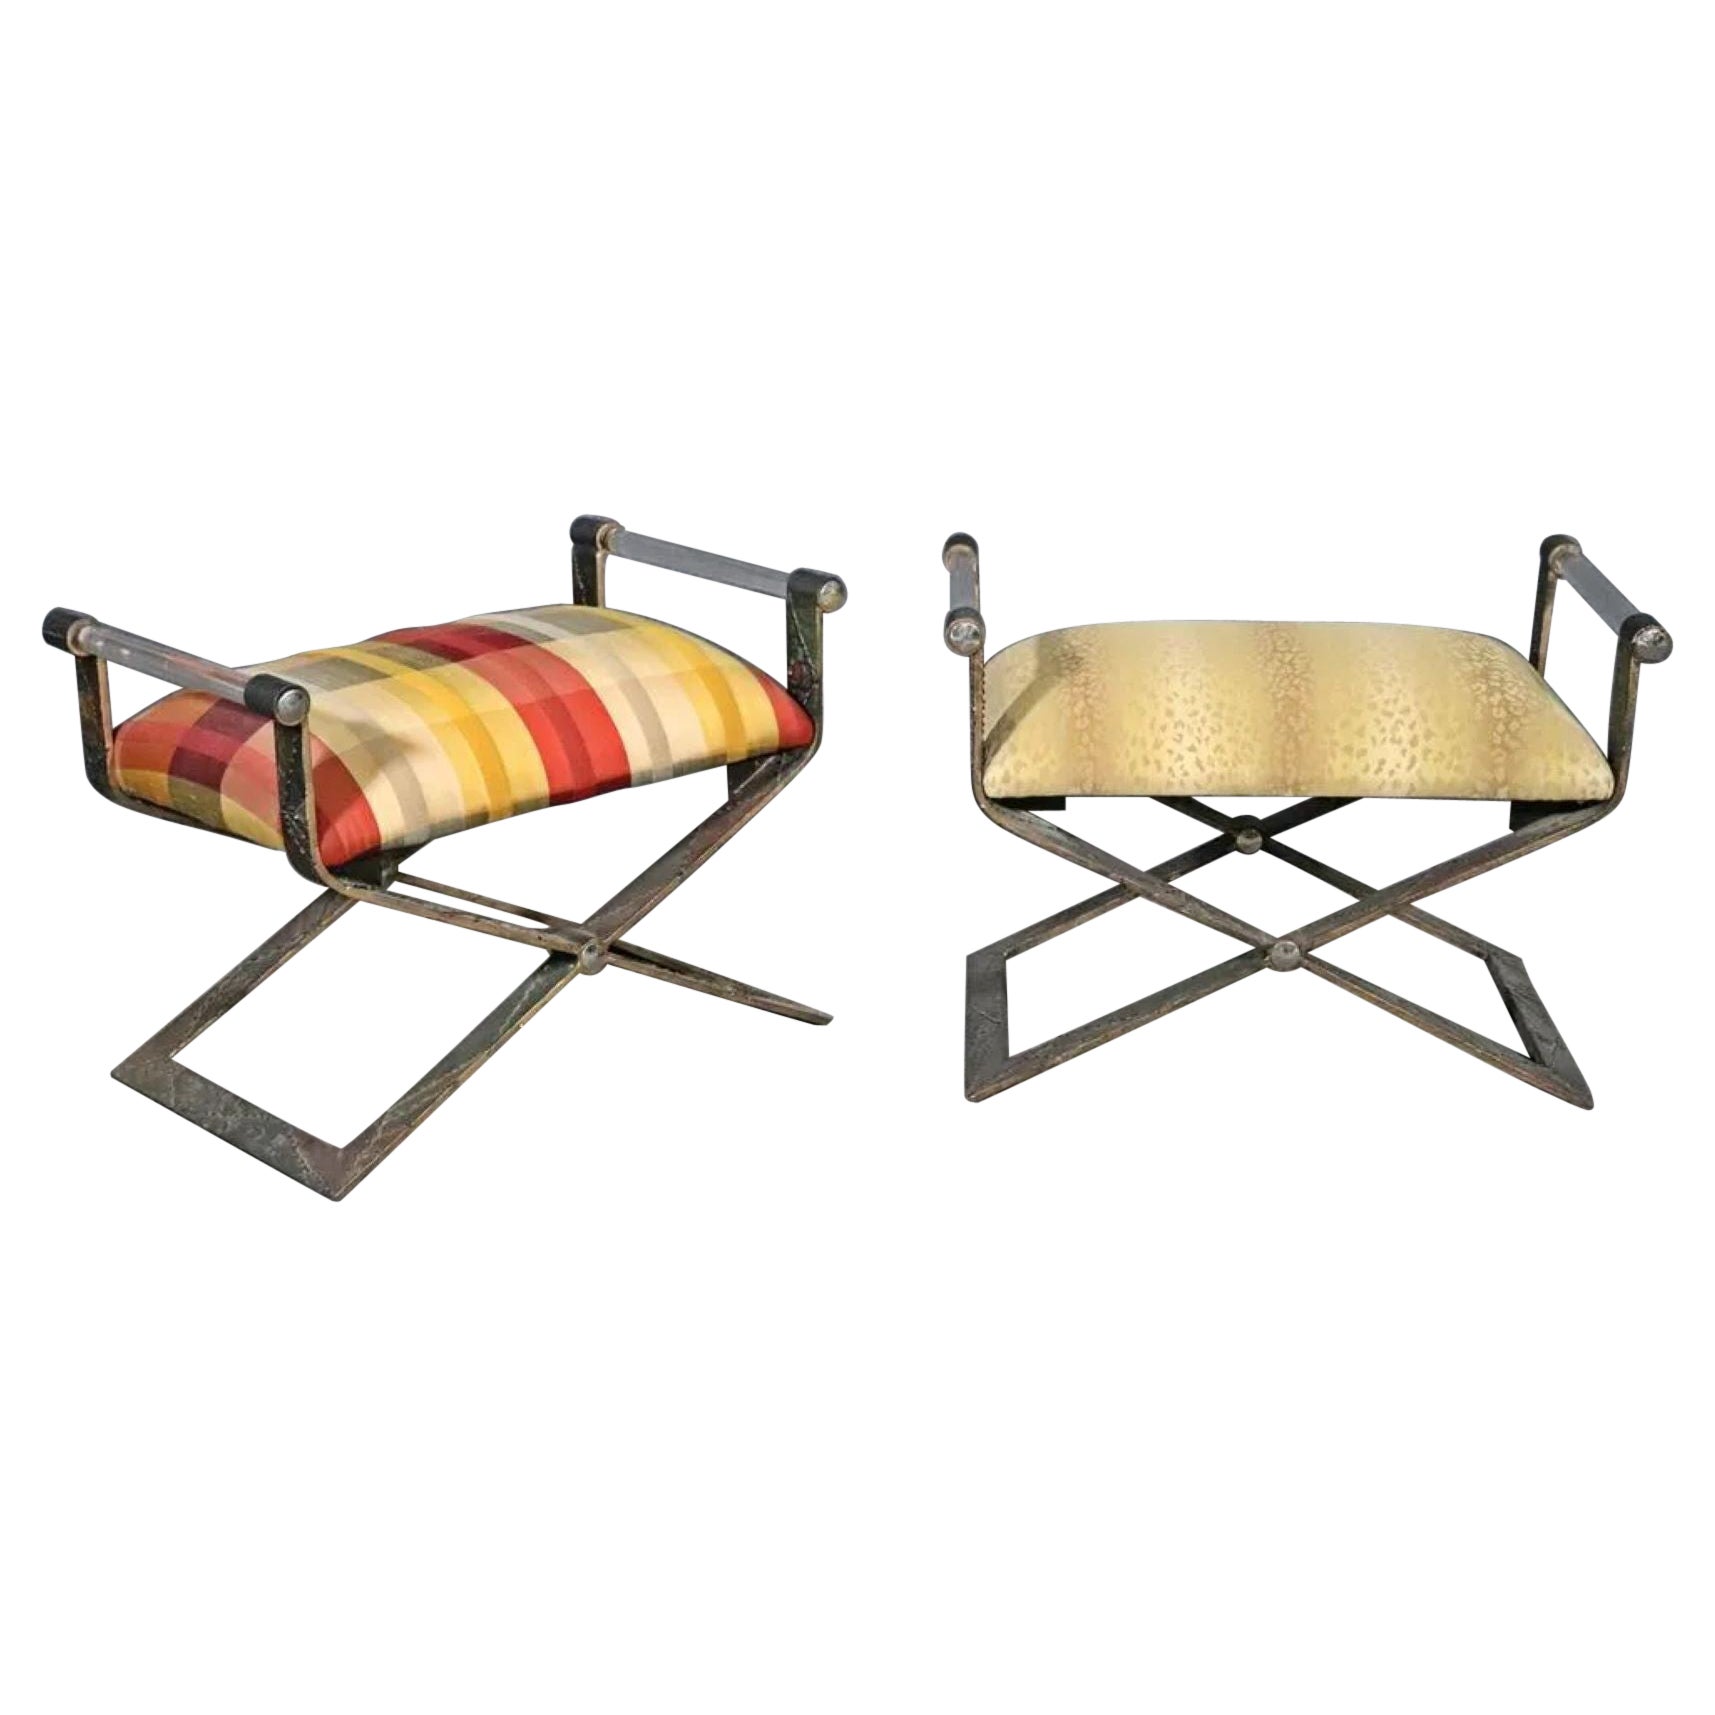 2 Mid-Century Modern Paul Evans Style X Benches, Lucite Armrests, Chrome Accents